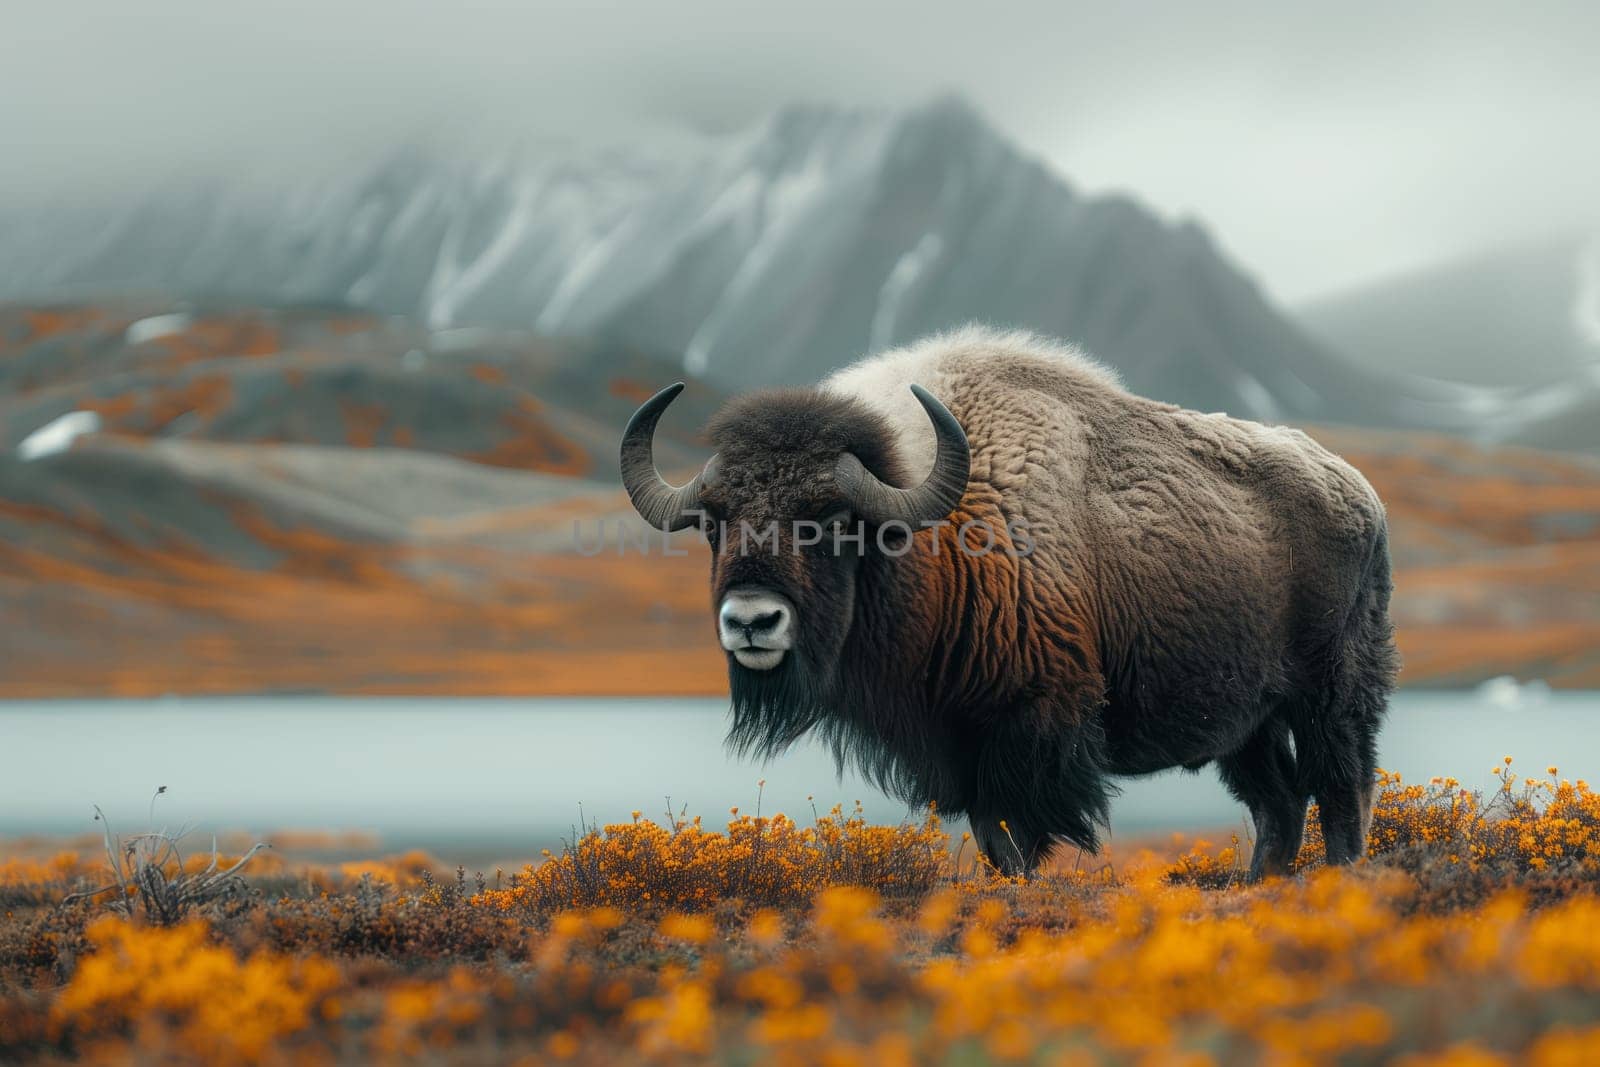 Bison in a flowerfilled highland meadow with mountain backdrop by richwolf